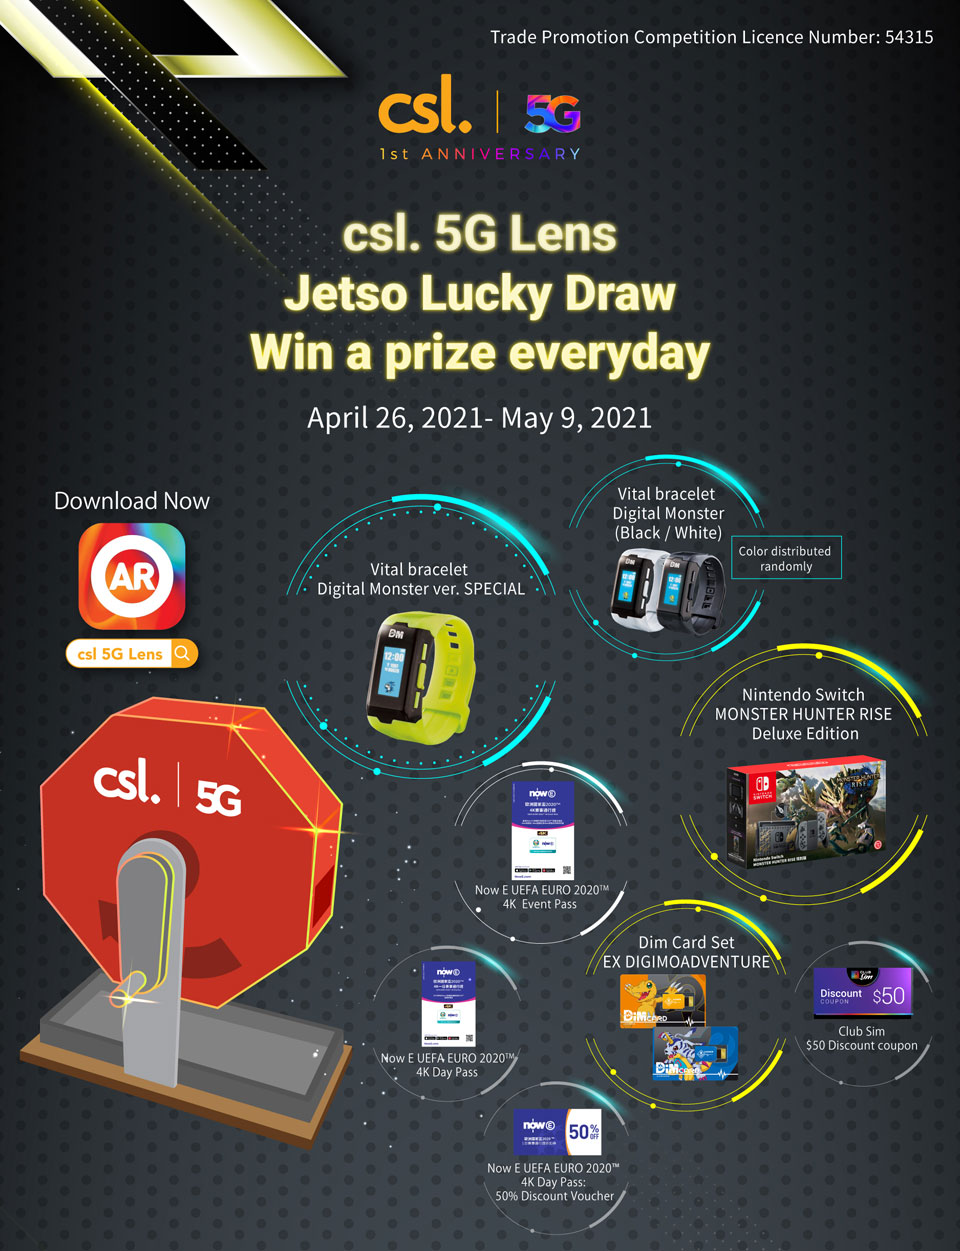 csl. 5G Lens Jetso Lucky Draw, win a prize everyday Apr 26, 2021 - May 9, 2021